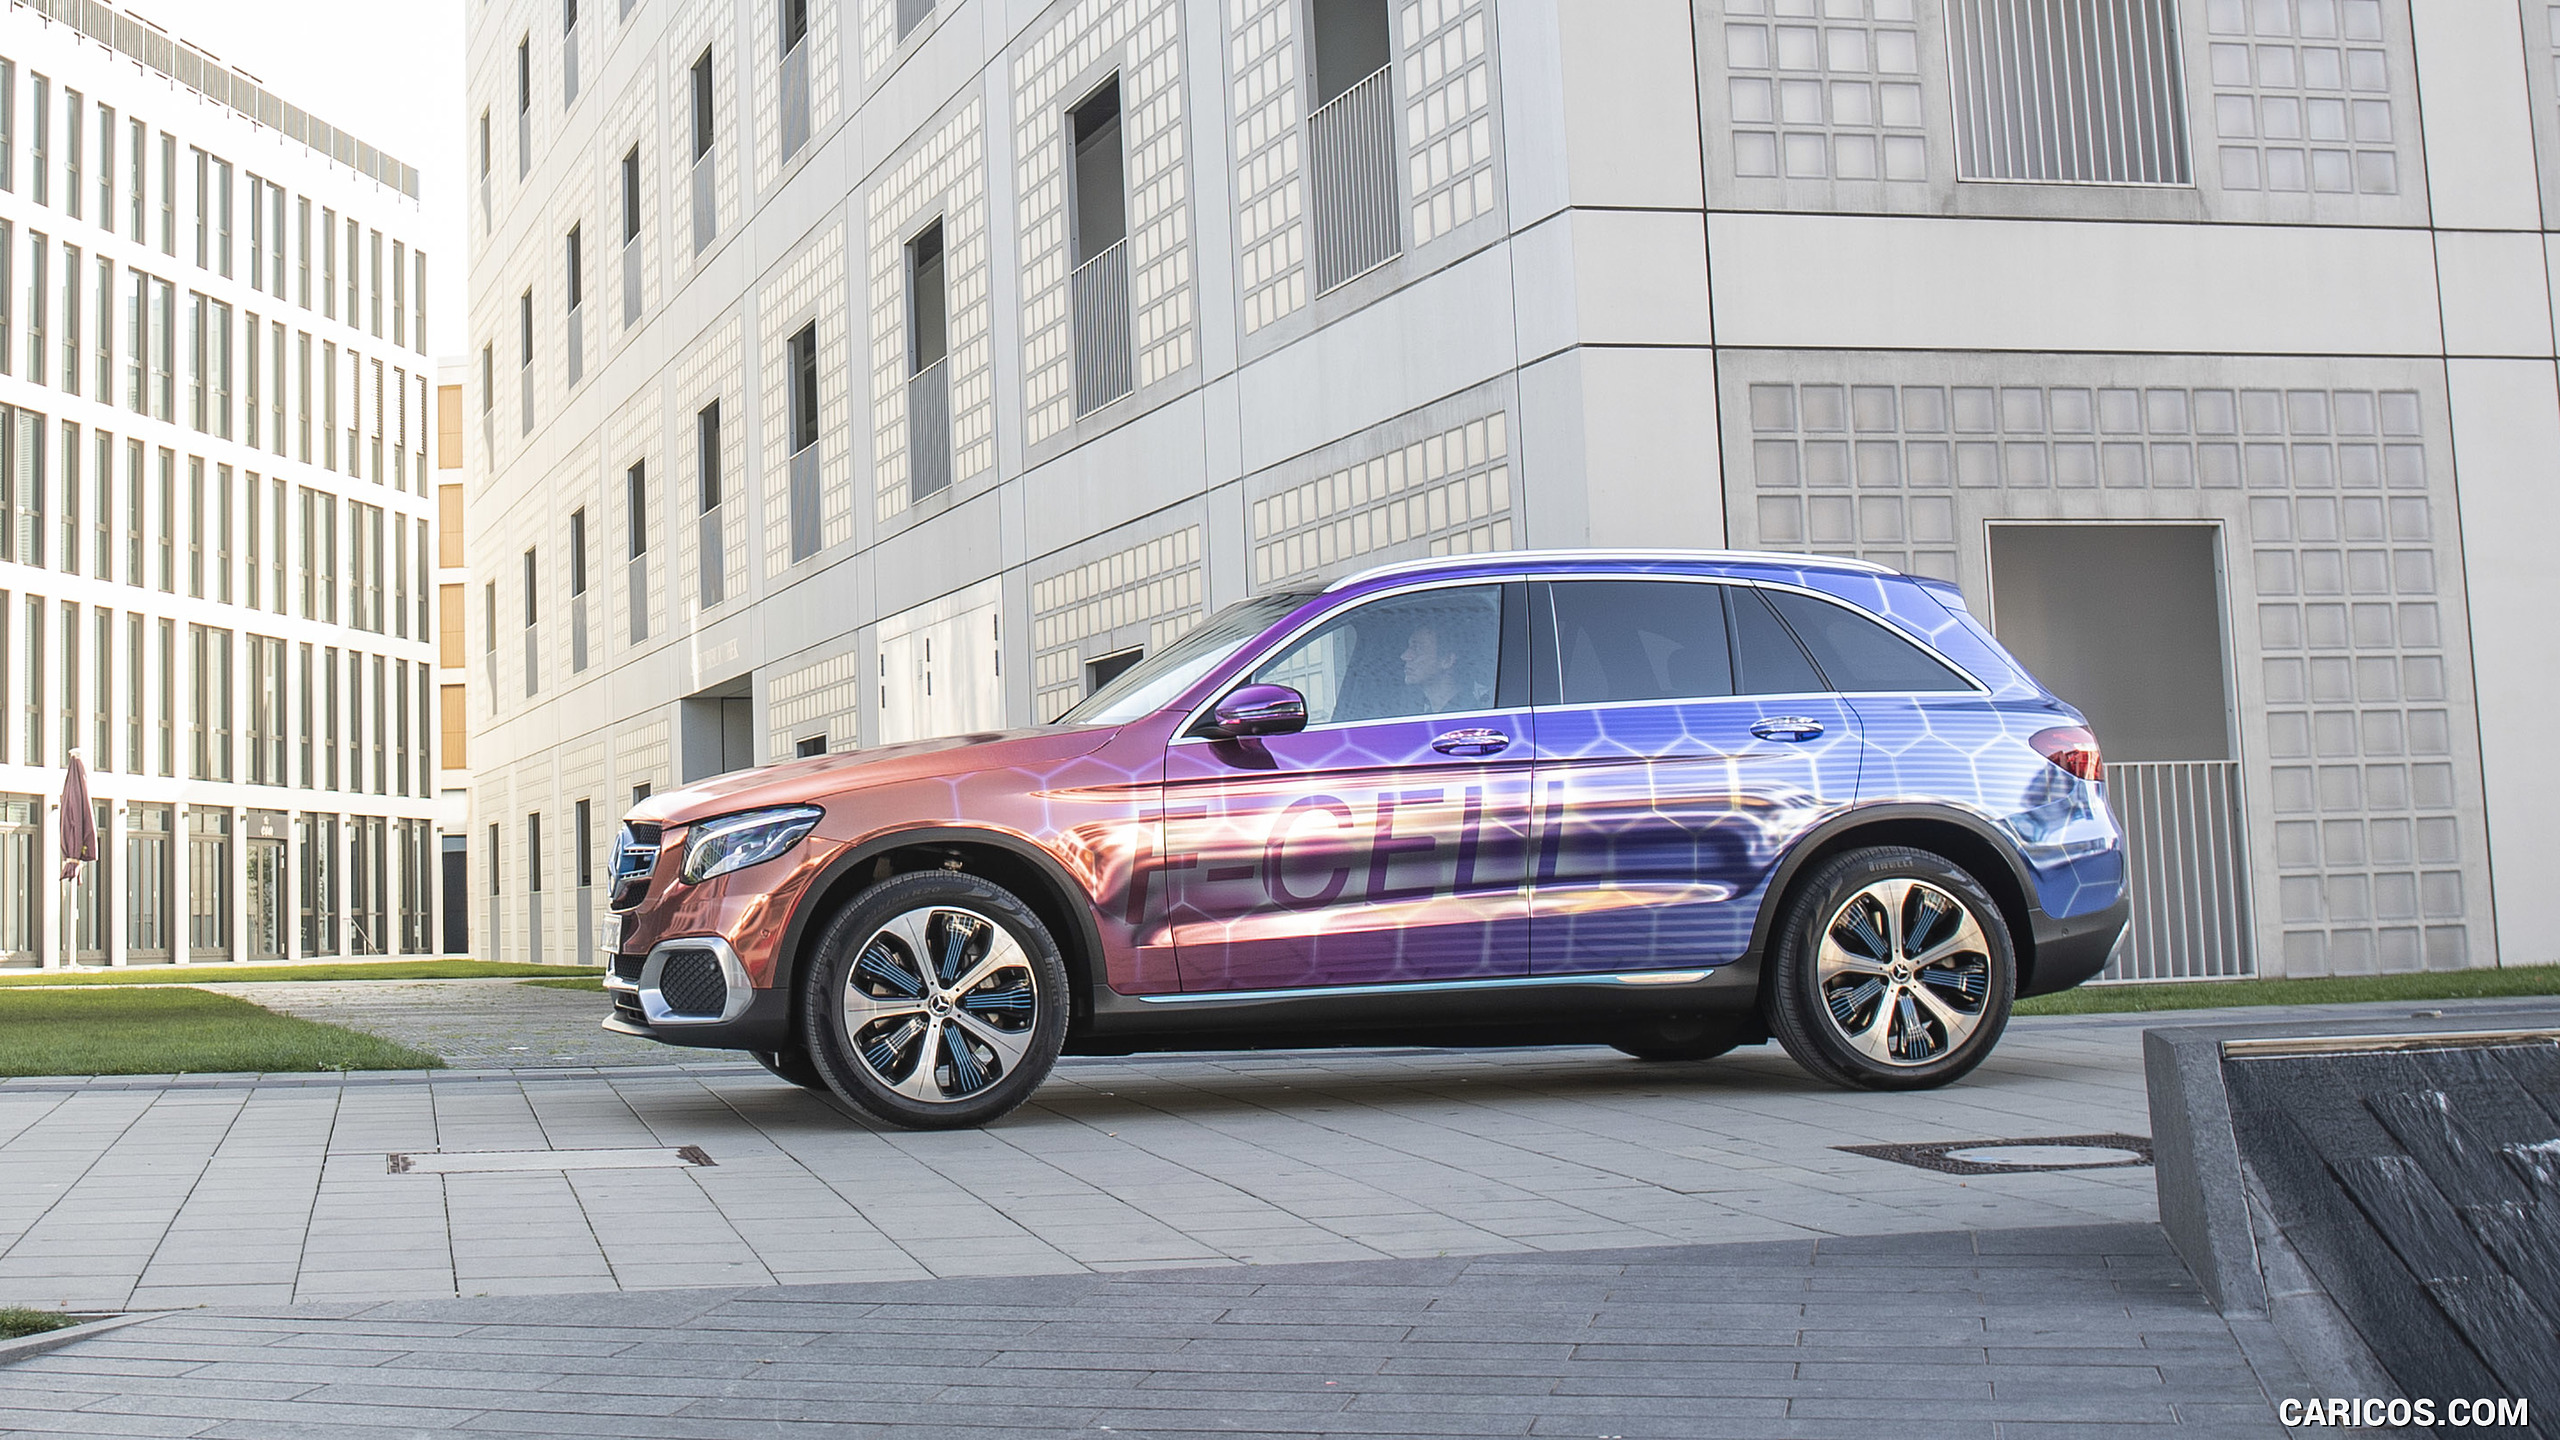 2019 Mercedes-Benz GLC F-CELL - Side, #65 of 95